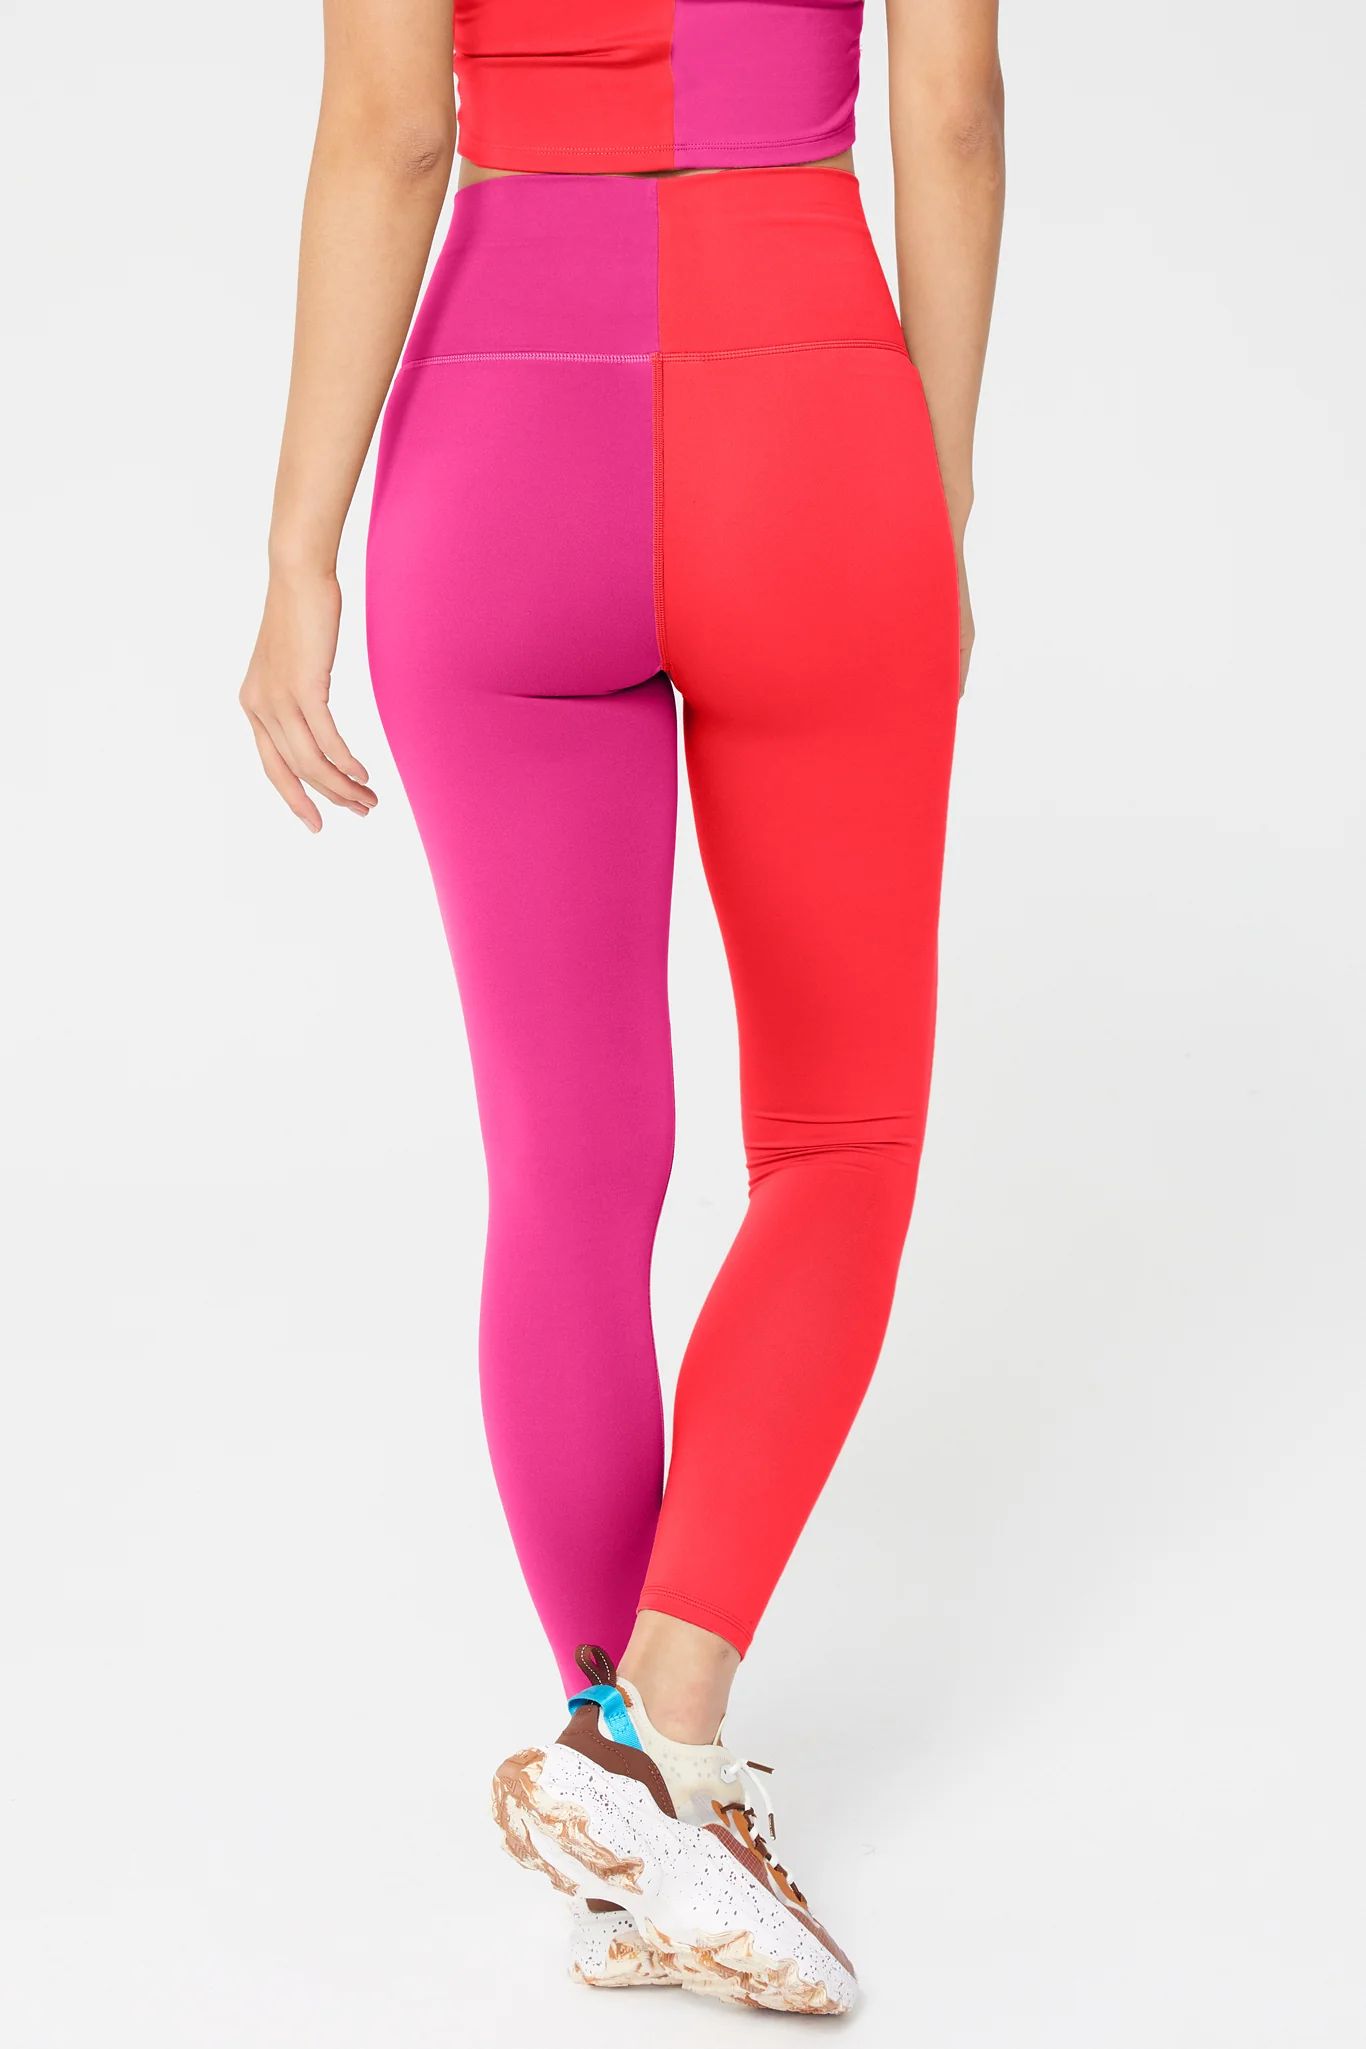 Two Tone TLC Leggings in Super Hot Red and Terez Pink | Terez